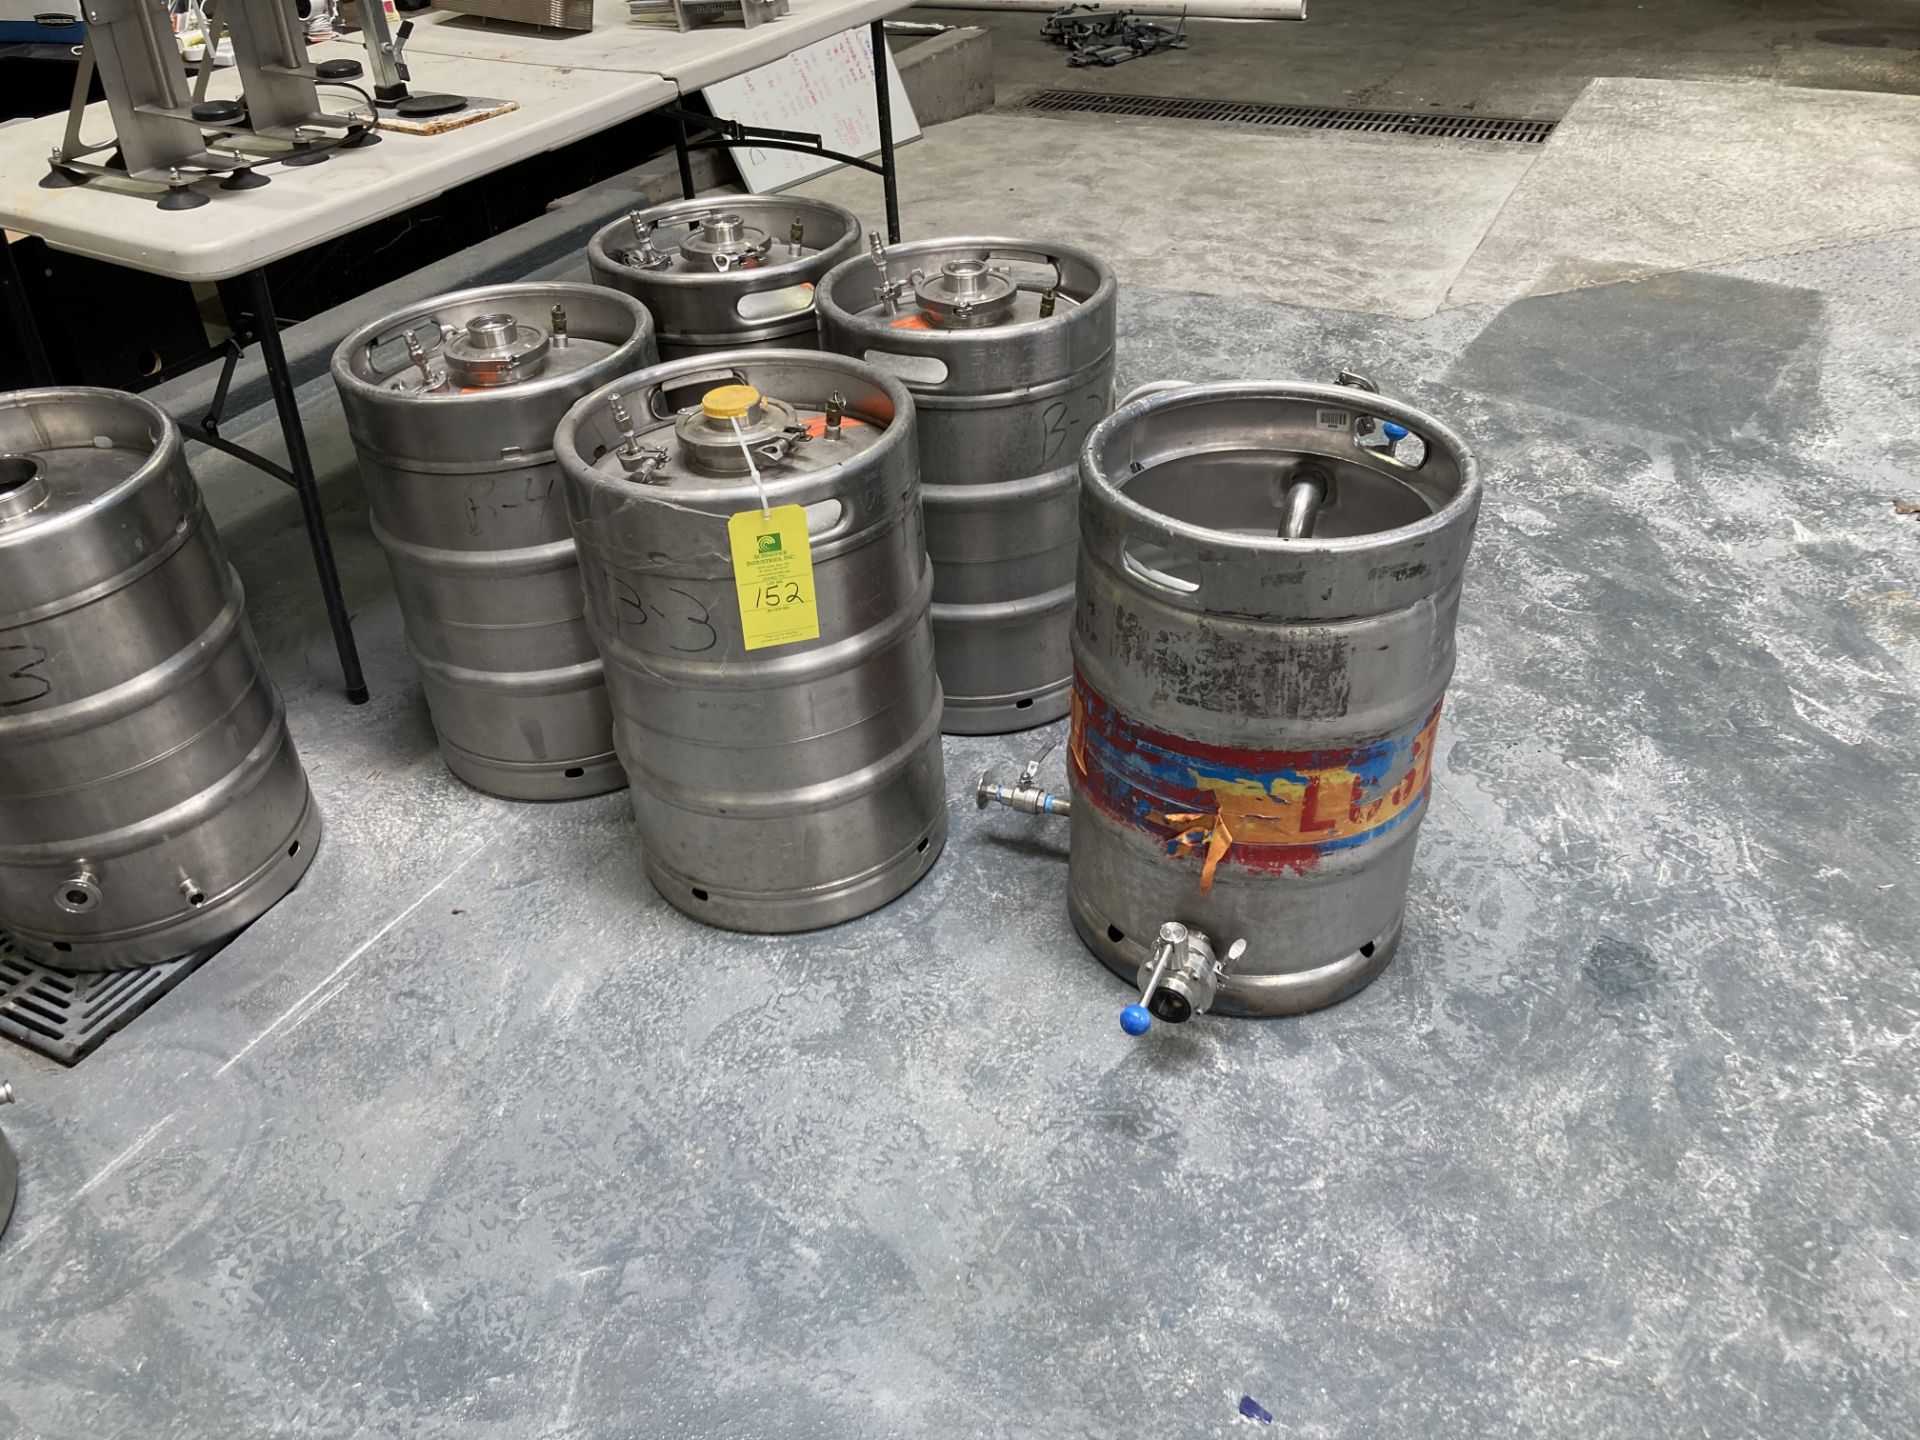 LOT OF 6, 5 Sankey retrofit 1/2 barrel kegs and 1 submergible pump Rigging fee of __$100__ to be